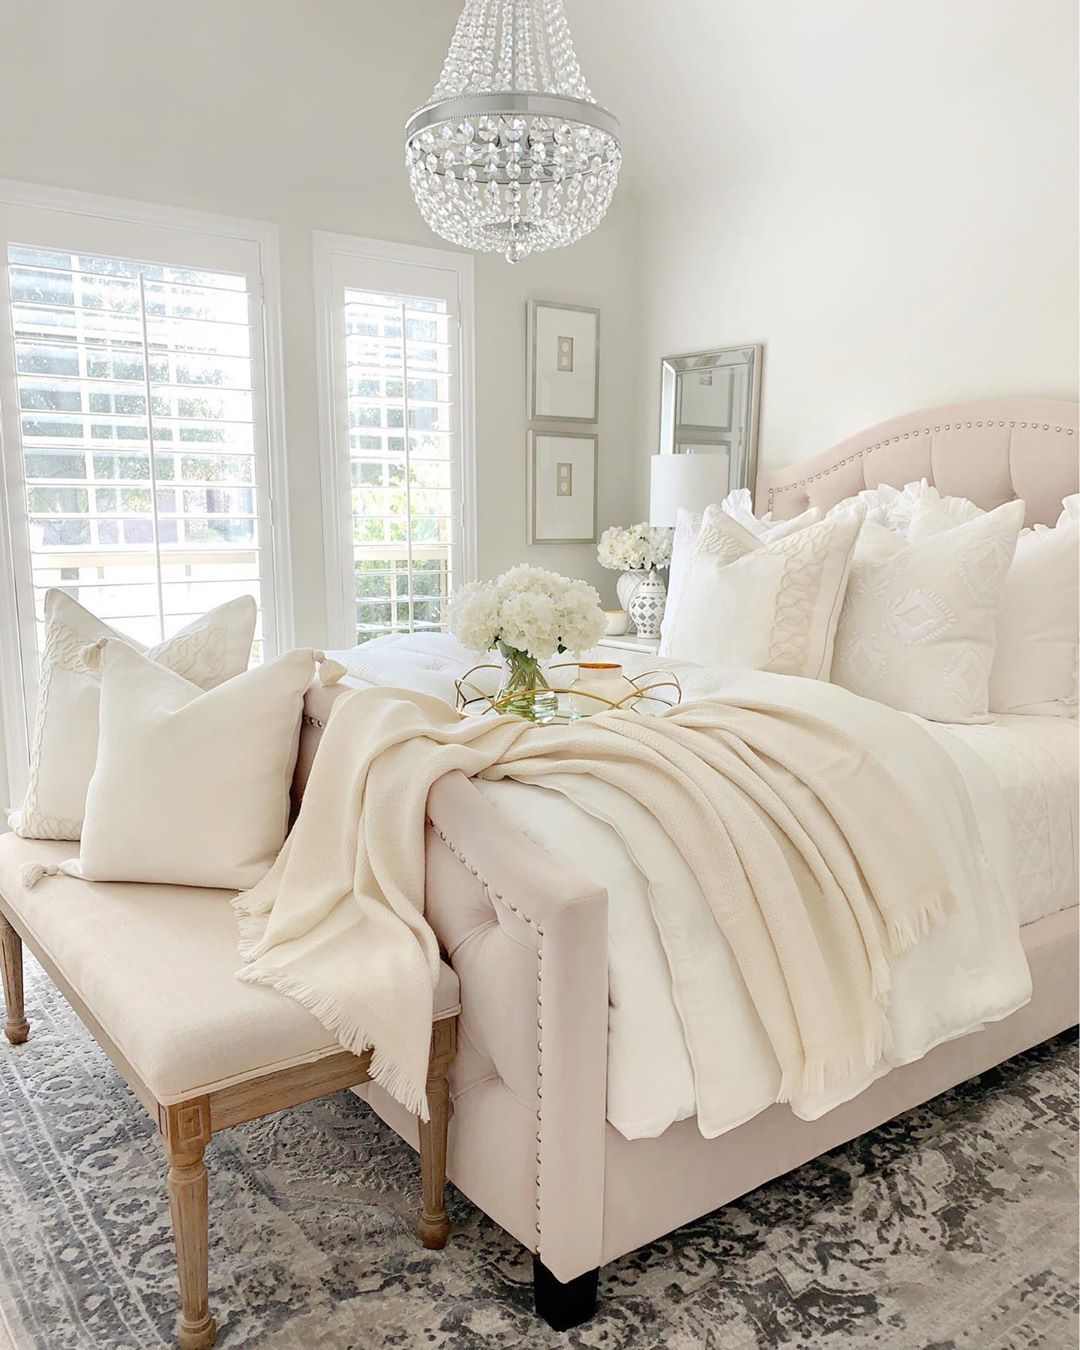 19 Amazing Glam Bedrooms with Chic Style - Glam BeDroom With Pink TufteD BeD Via @theDecorDiet